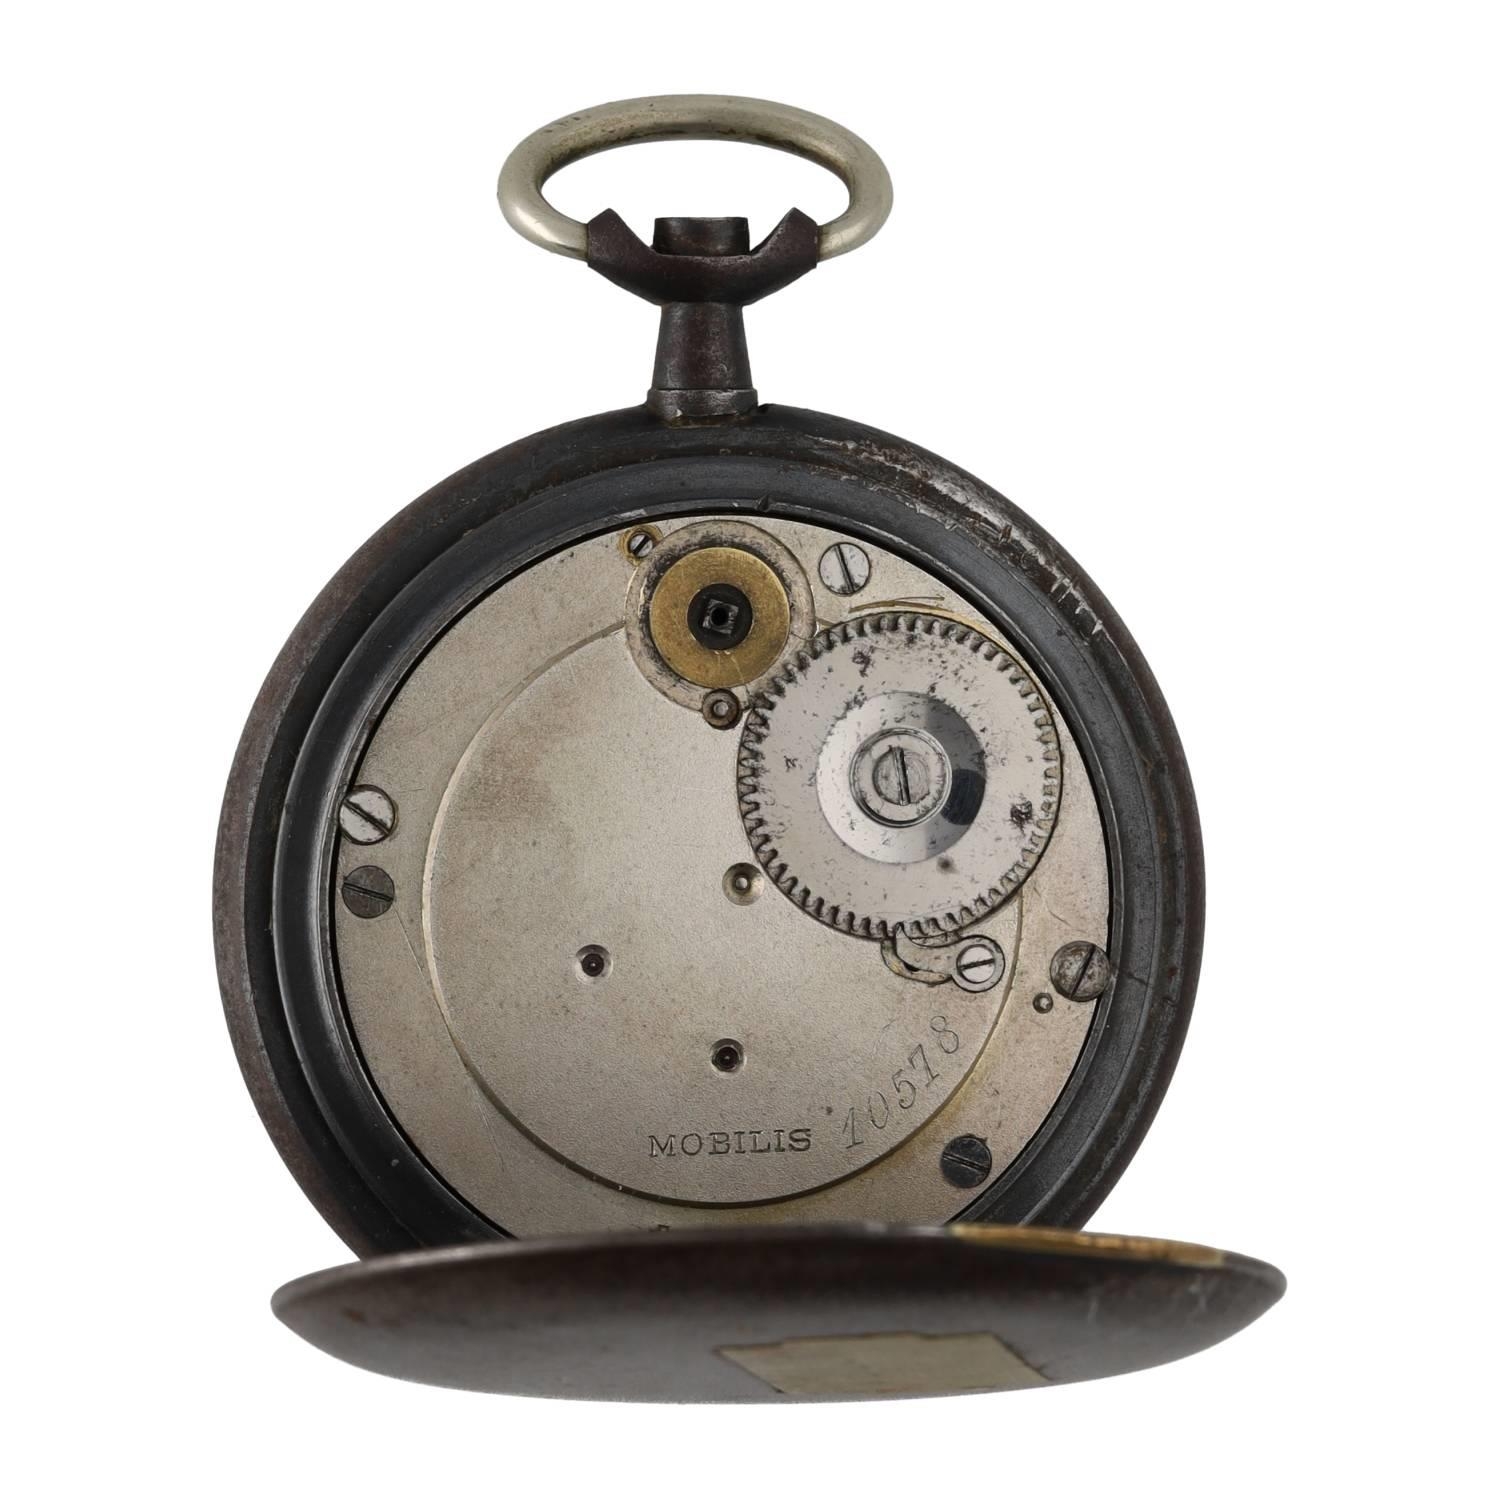 Interesting gunmetal Hebdomas style tourbillon pocket watch for repair, the movement signed Mobilis, - Image 2 of 3